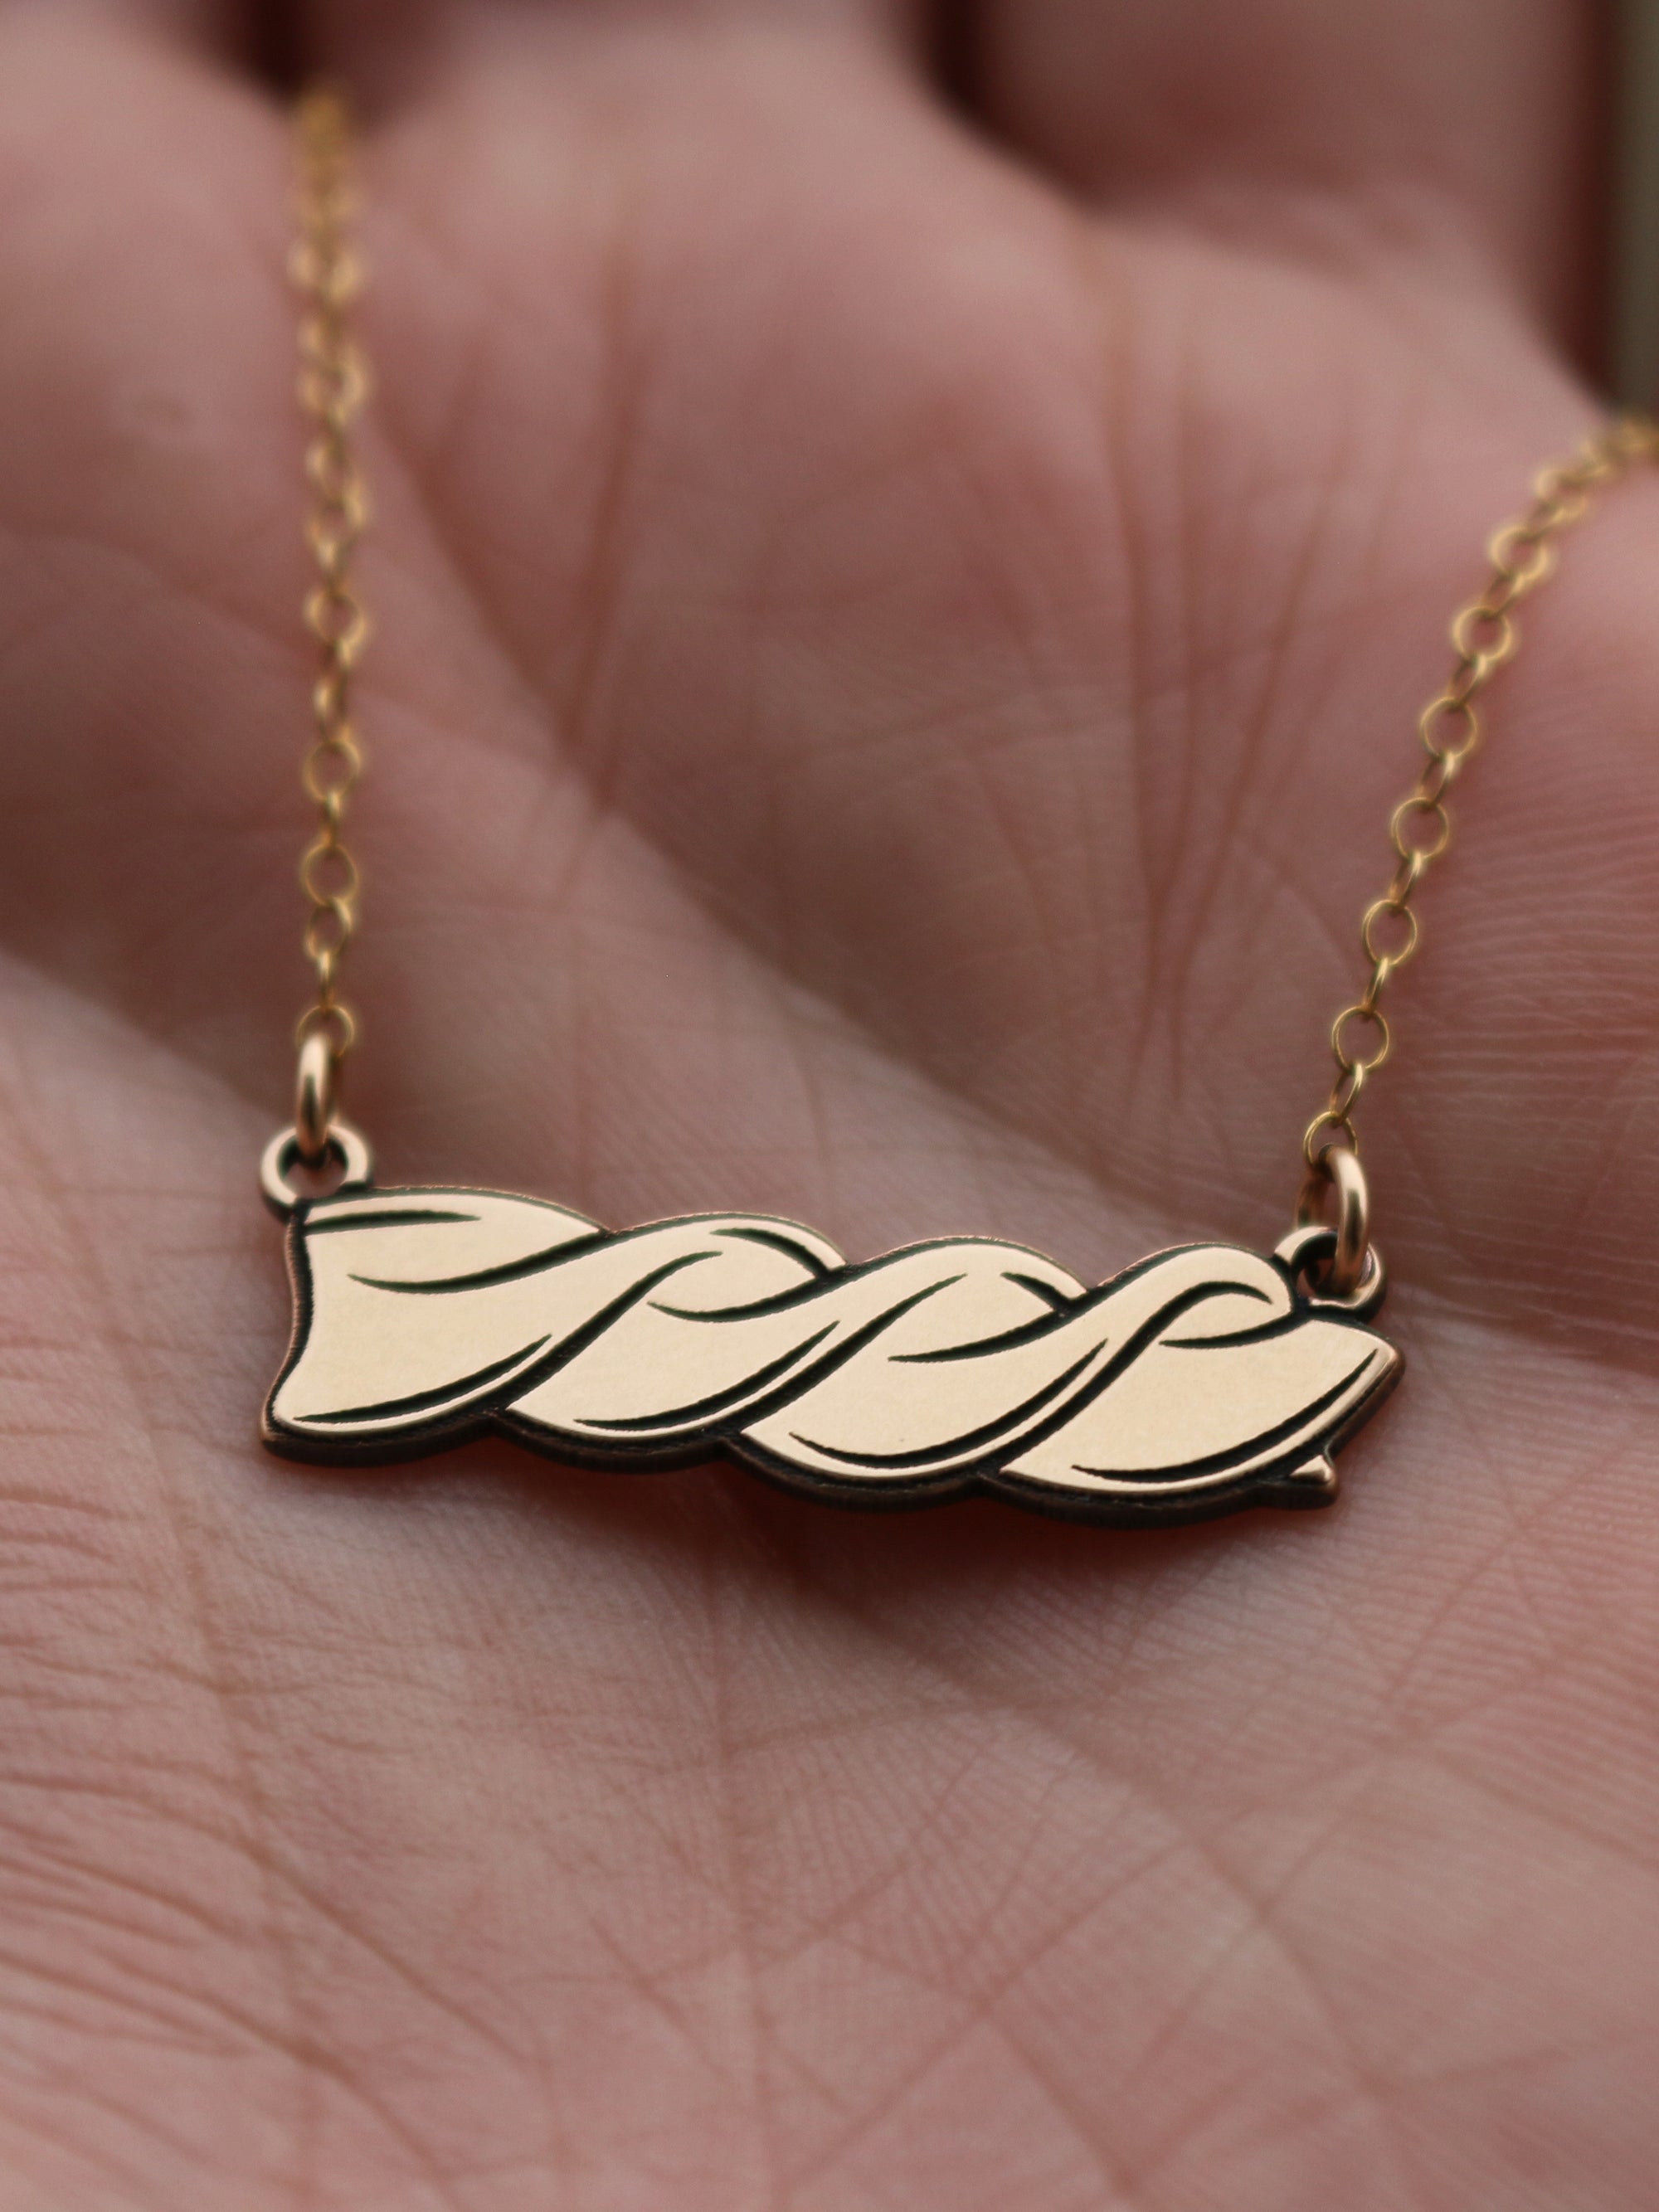 Fusilli Pasta Necklace - Gold Filled